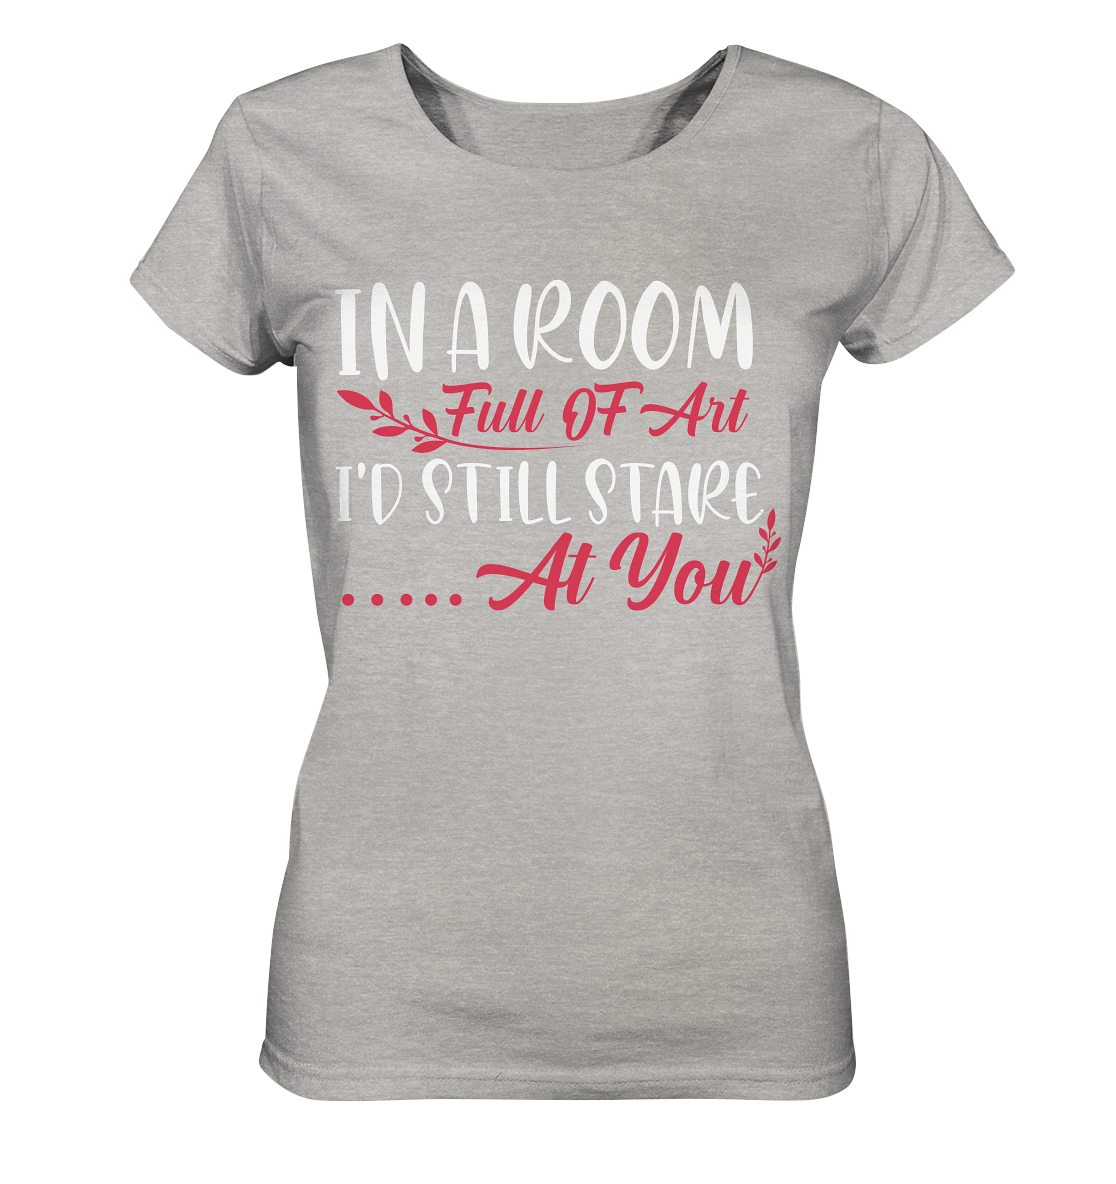 In a room full of art i´d still stare at you - Ladies Organic Shirt (meliert)